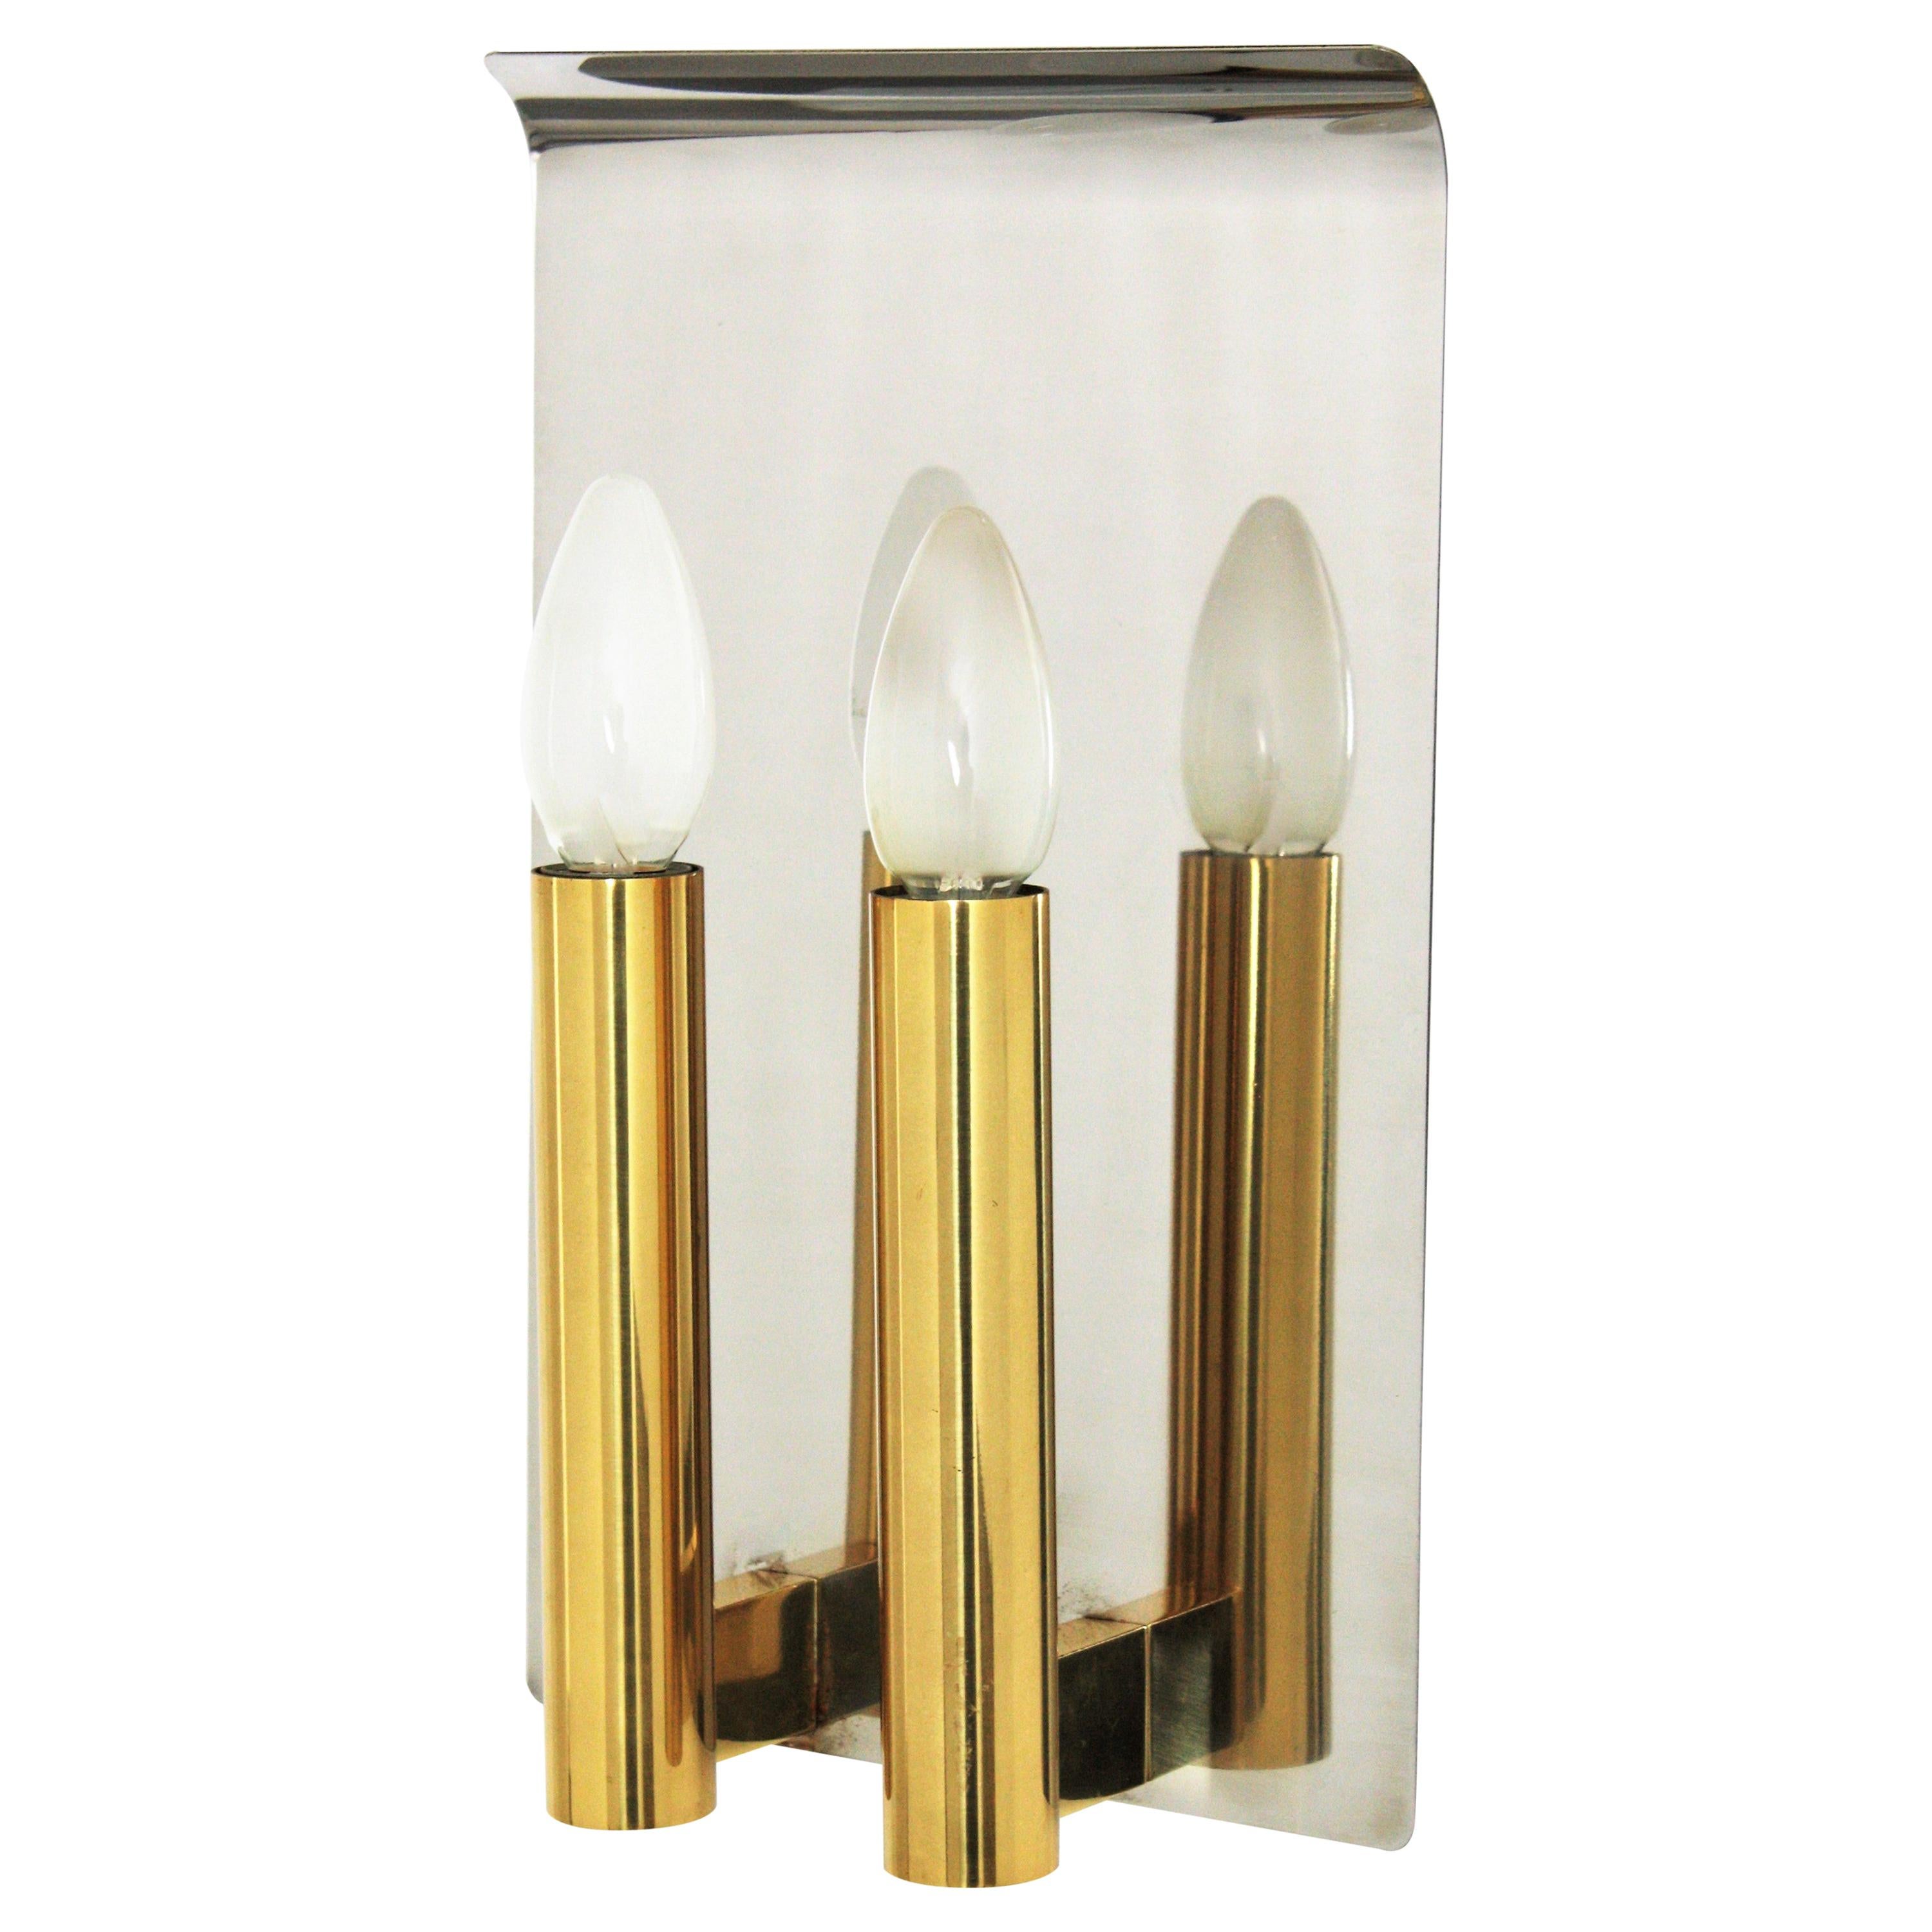 Sciolari Wall Sconce in Brass and Steel, Italy, 1960s For Sale